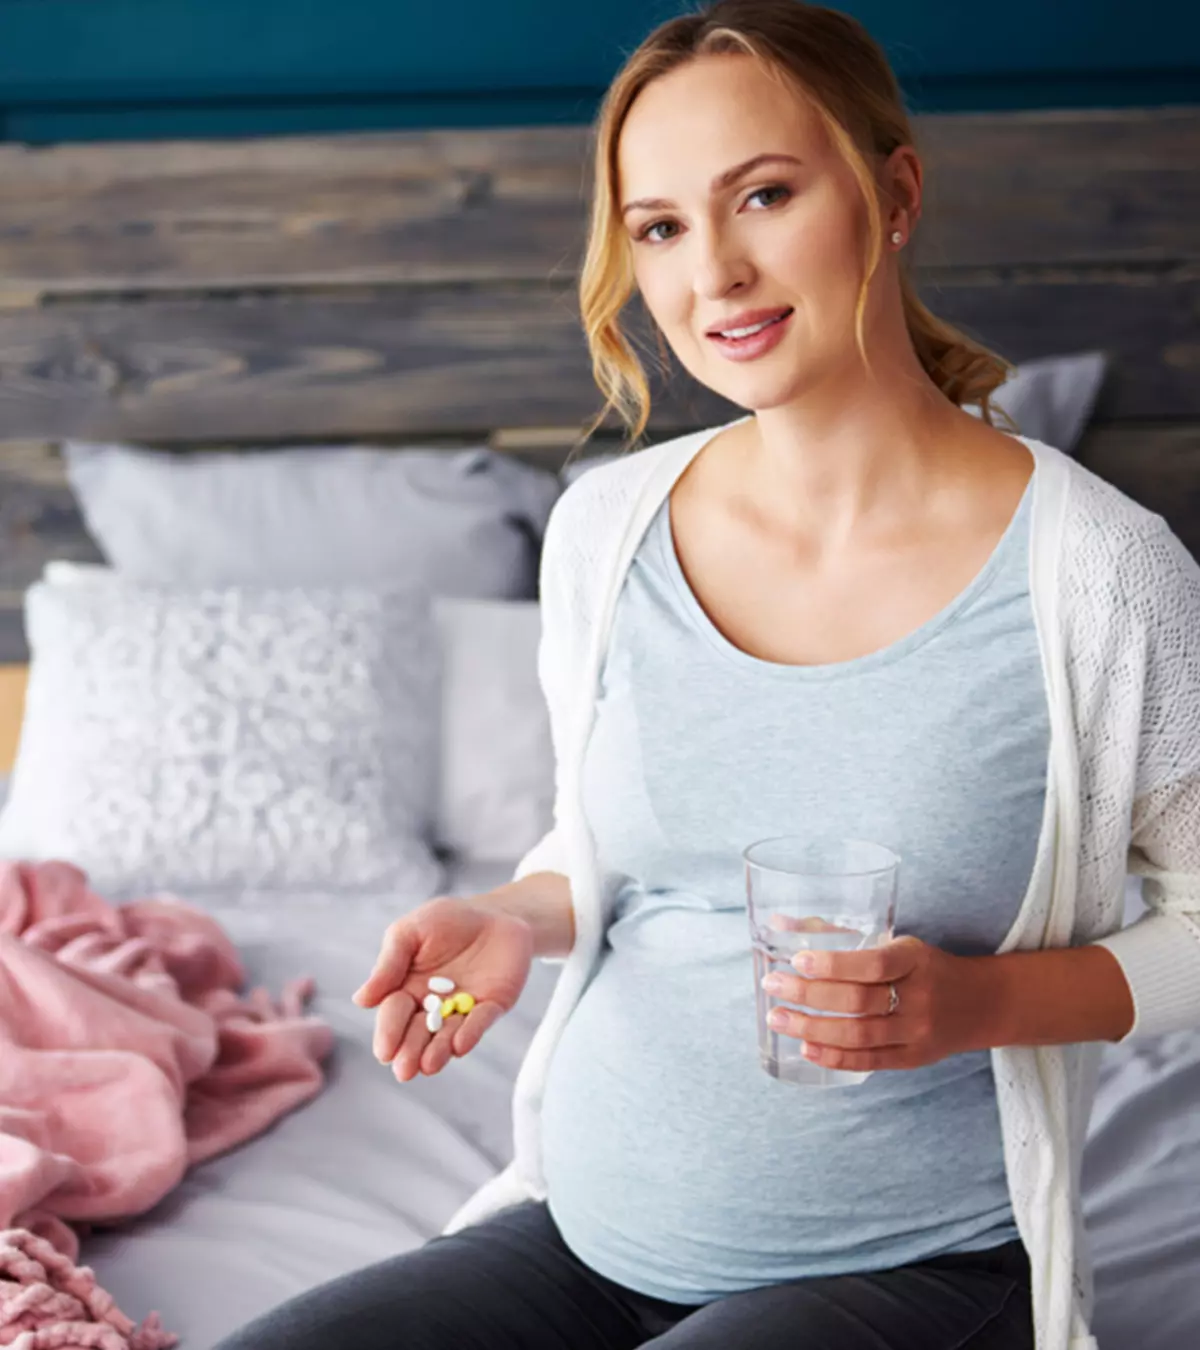 Medications During Pregnancy: What's Safe And What's Not?